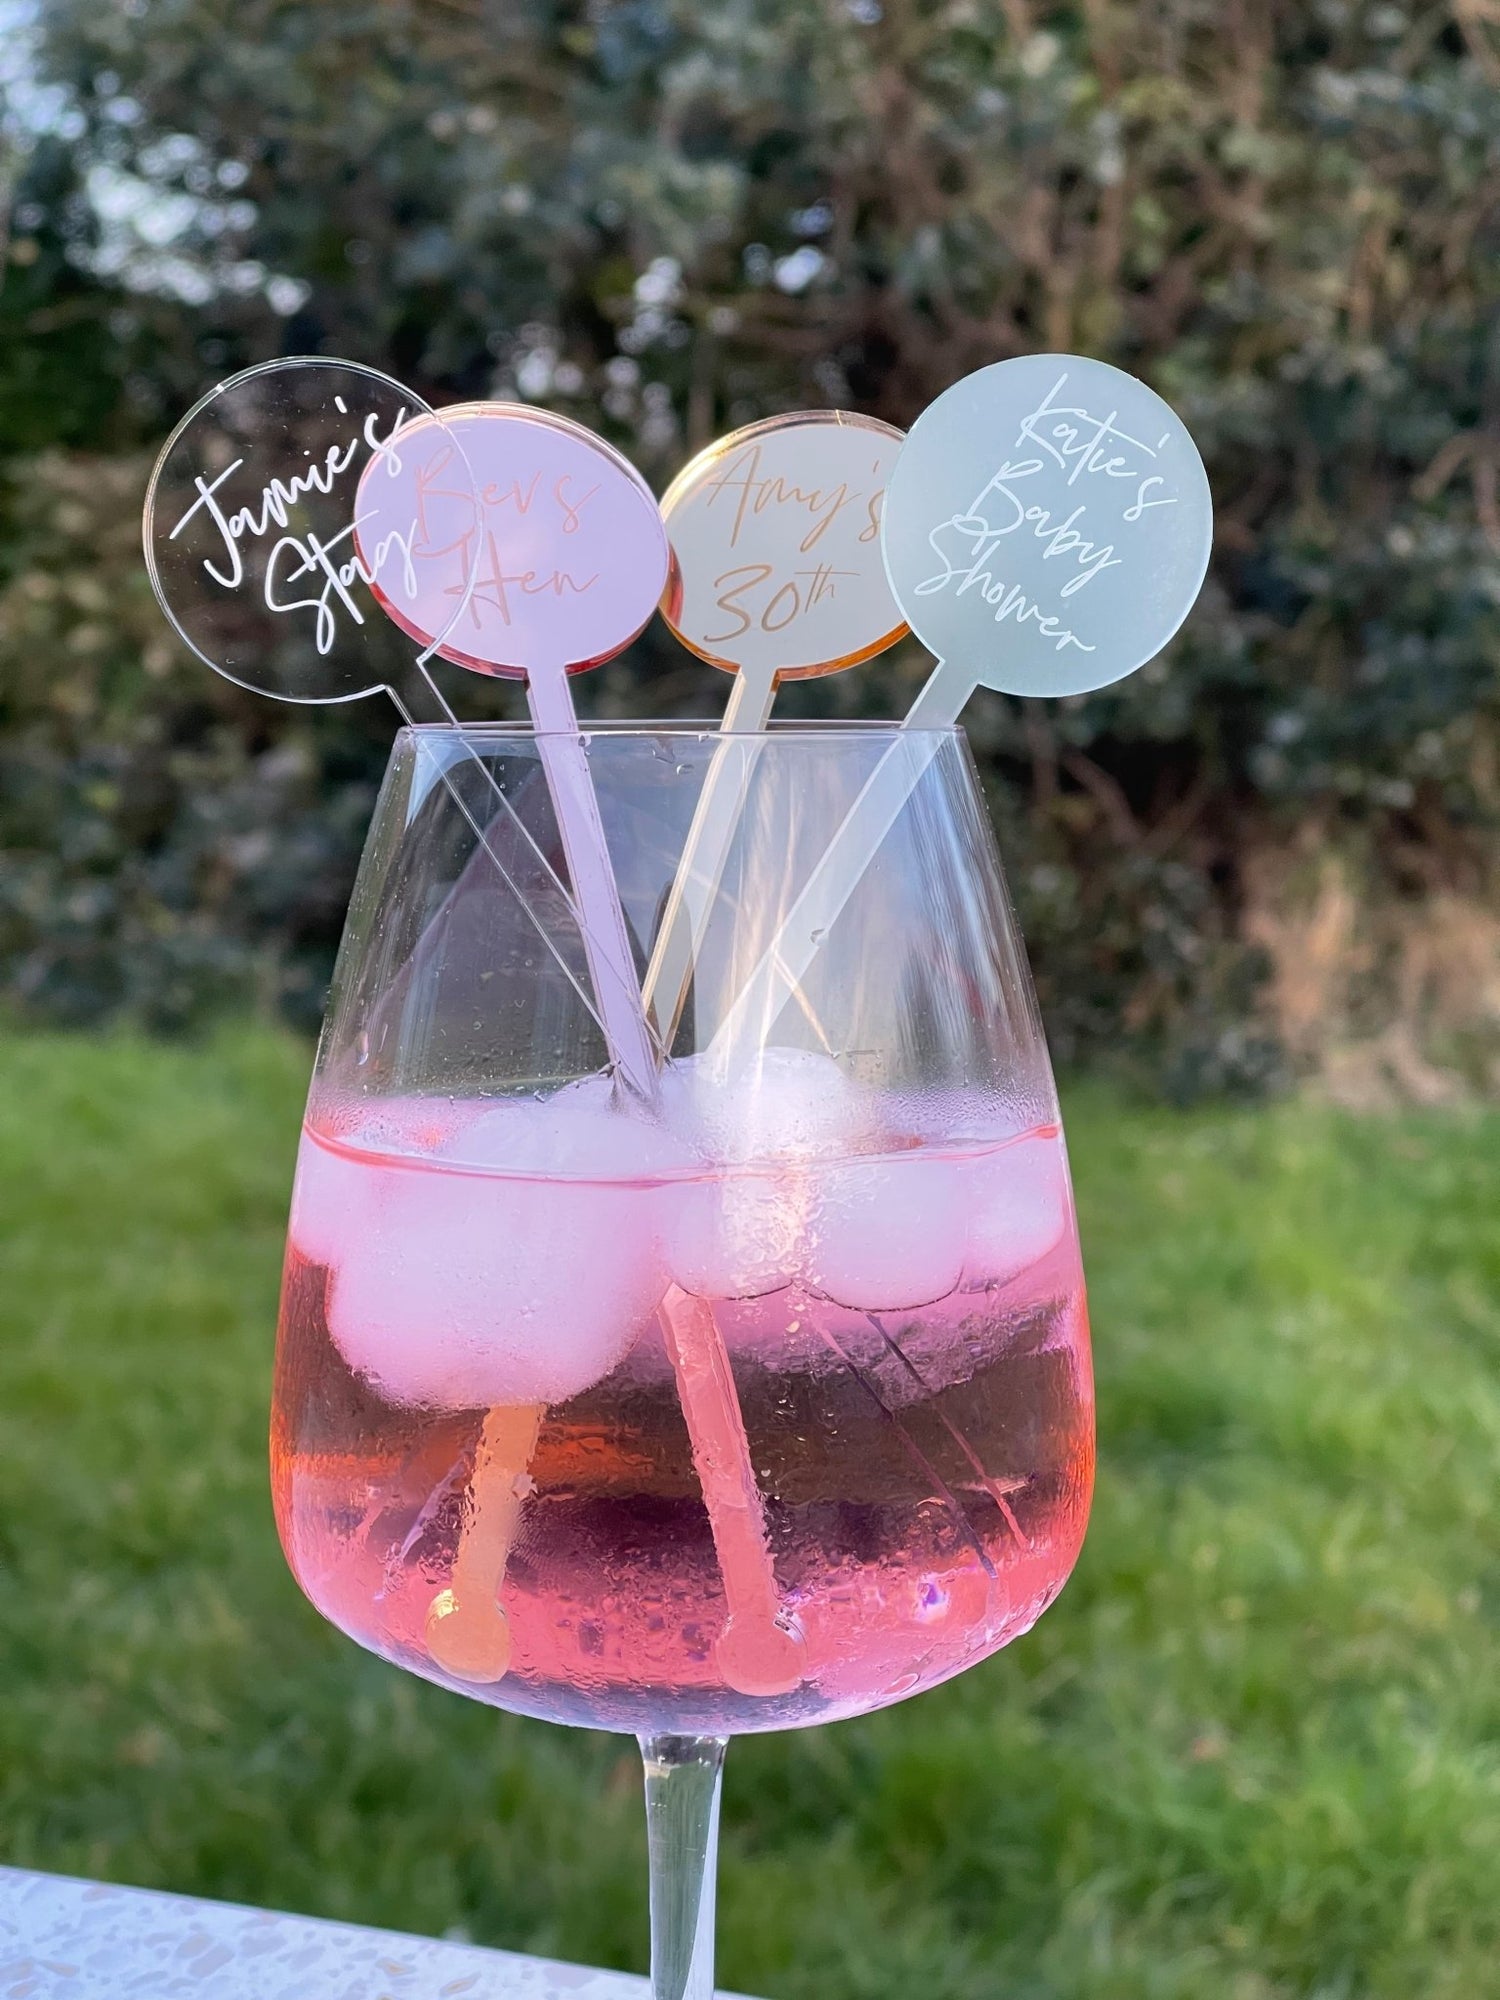 acrylic cocktail drink stirrers for party decorations 